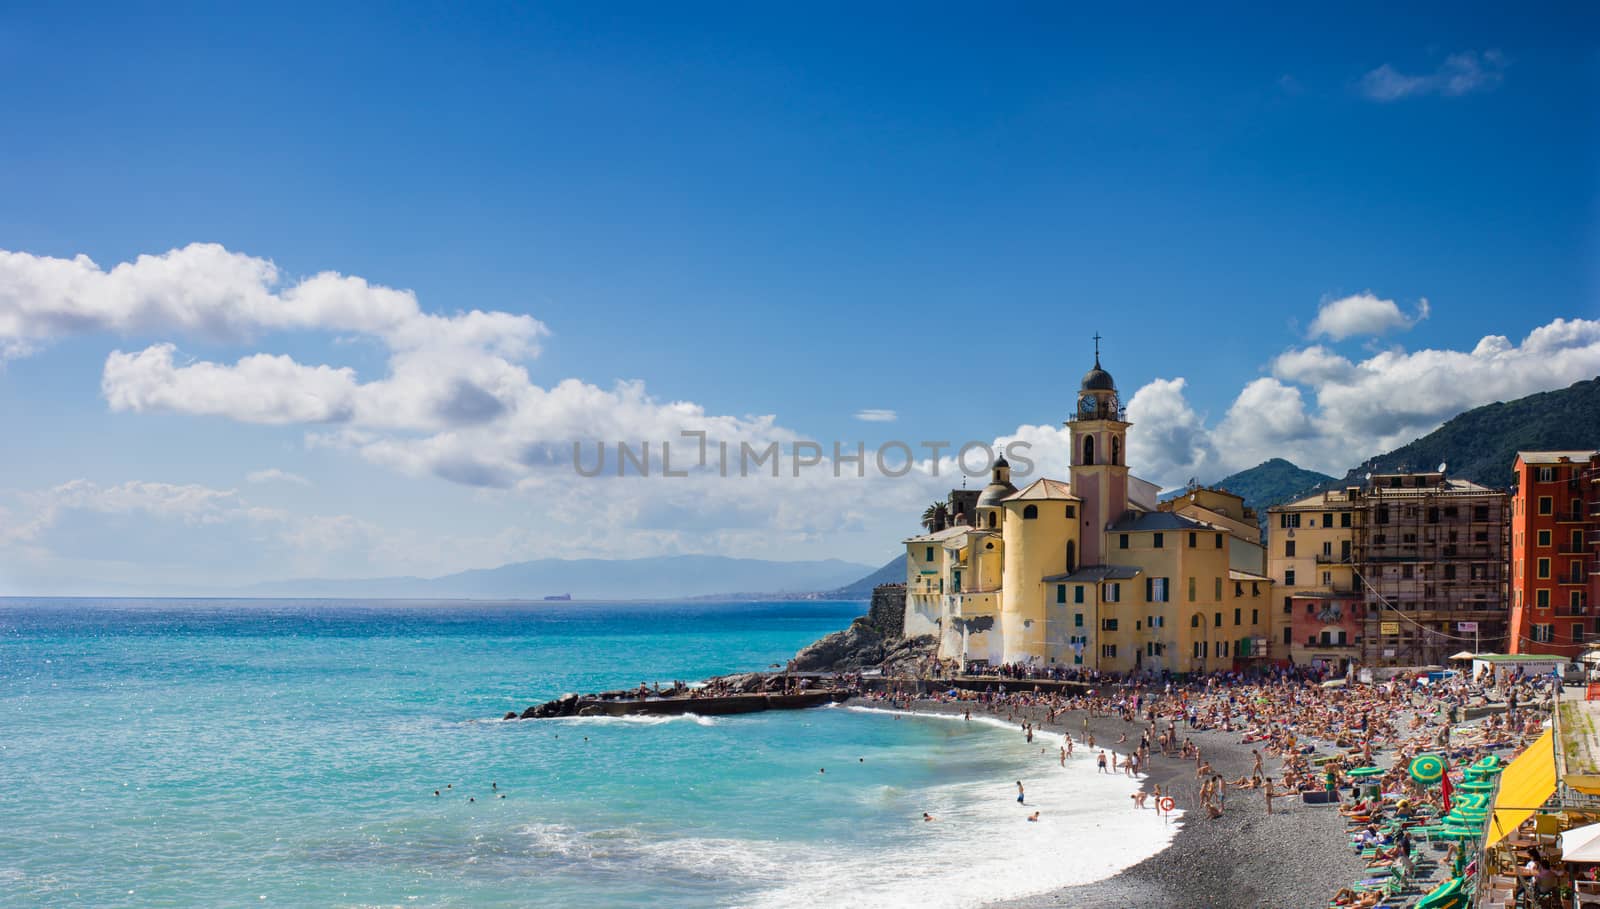 View of the coast of Camogli in Liguria by goghy73